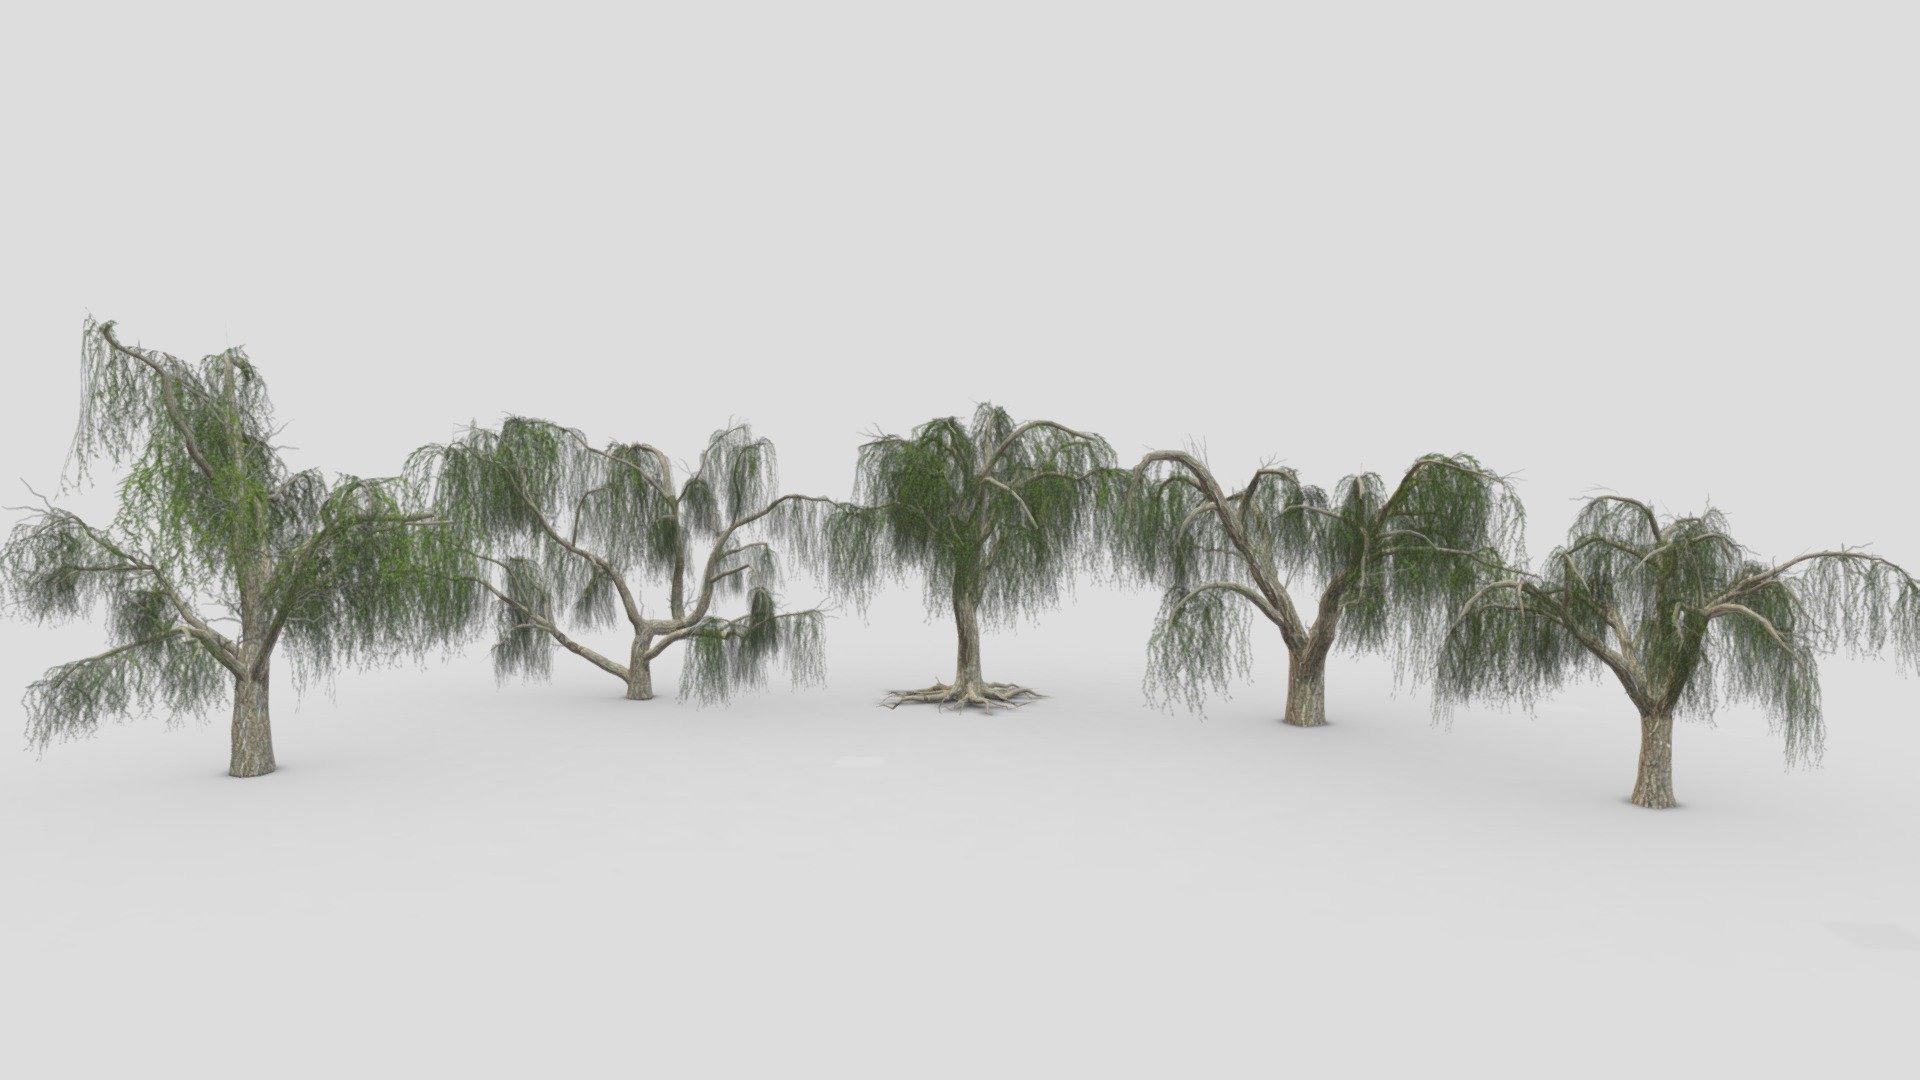 I try to provide low poly model of Weeping Willow tree to use for your game project. I hope this model will be useful for you. This file countains 5 3D low poly models of Weeping willow tree 3d model